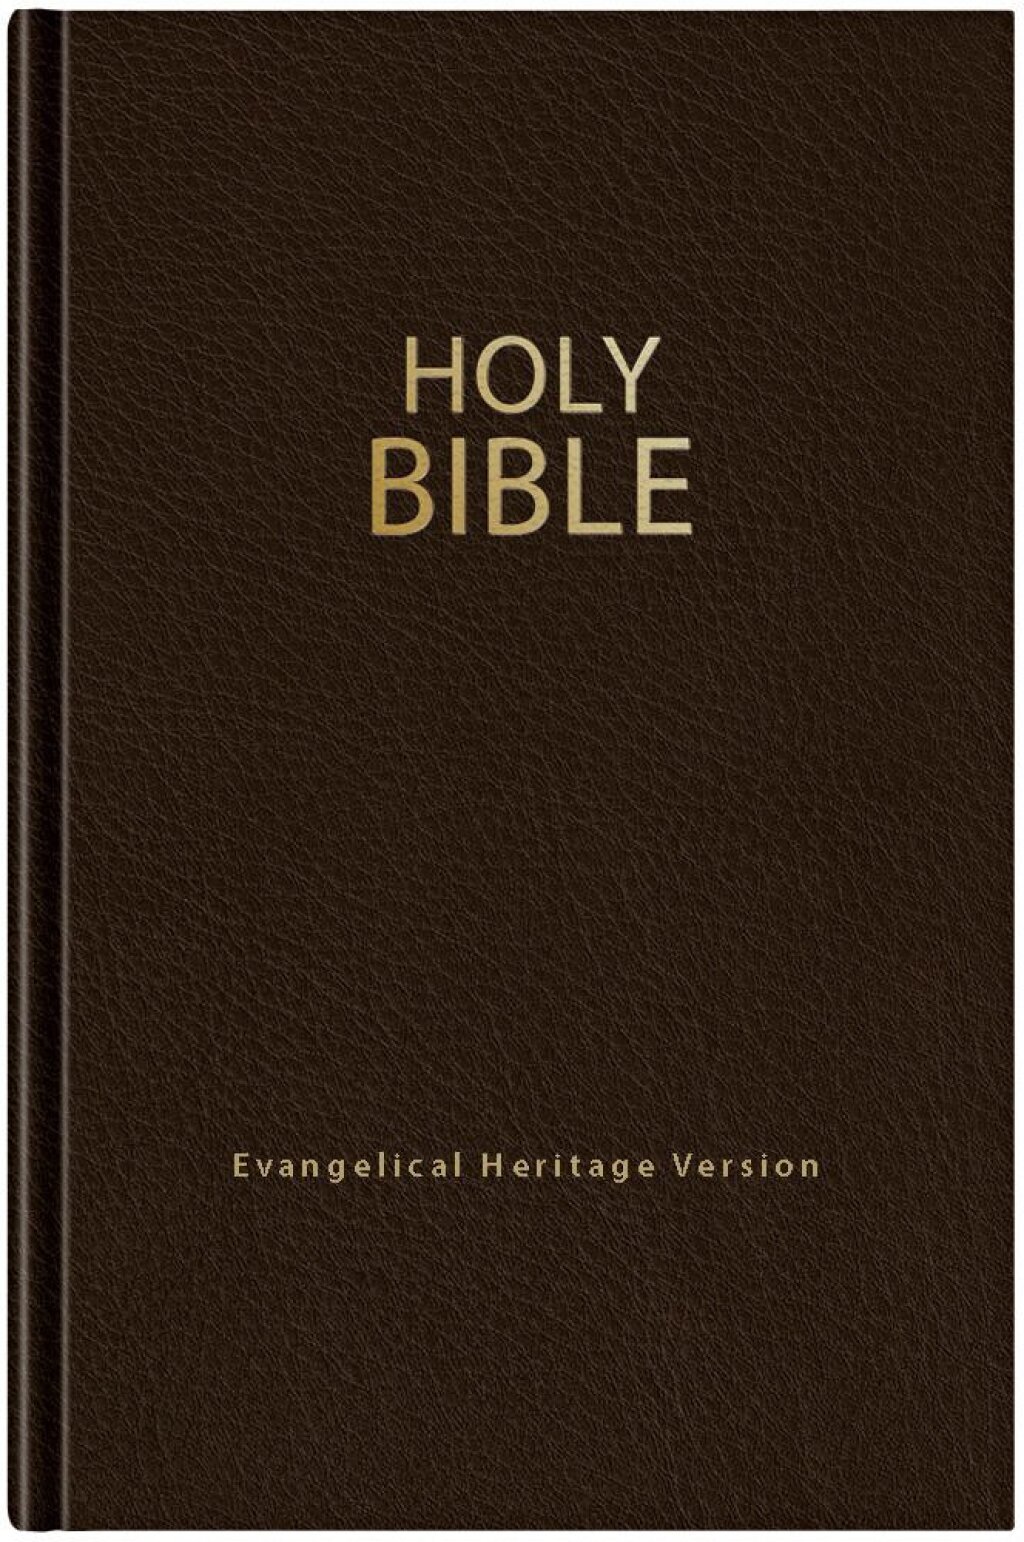 Holy Bible - Evangelical Heritage Version.